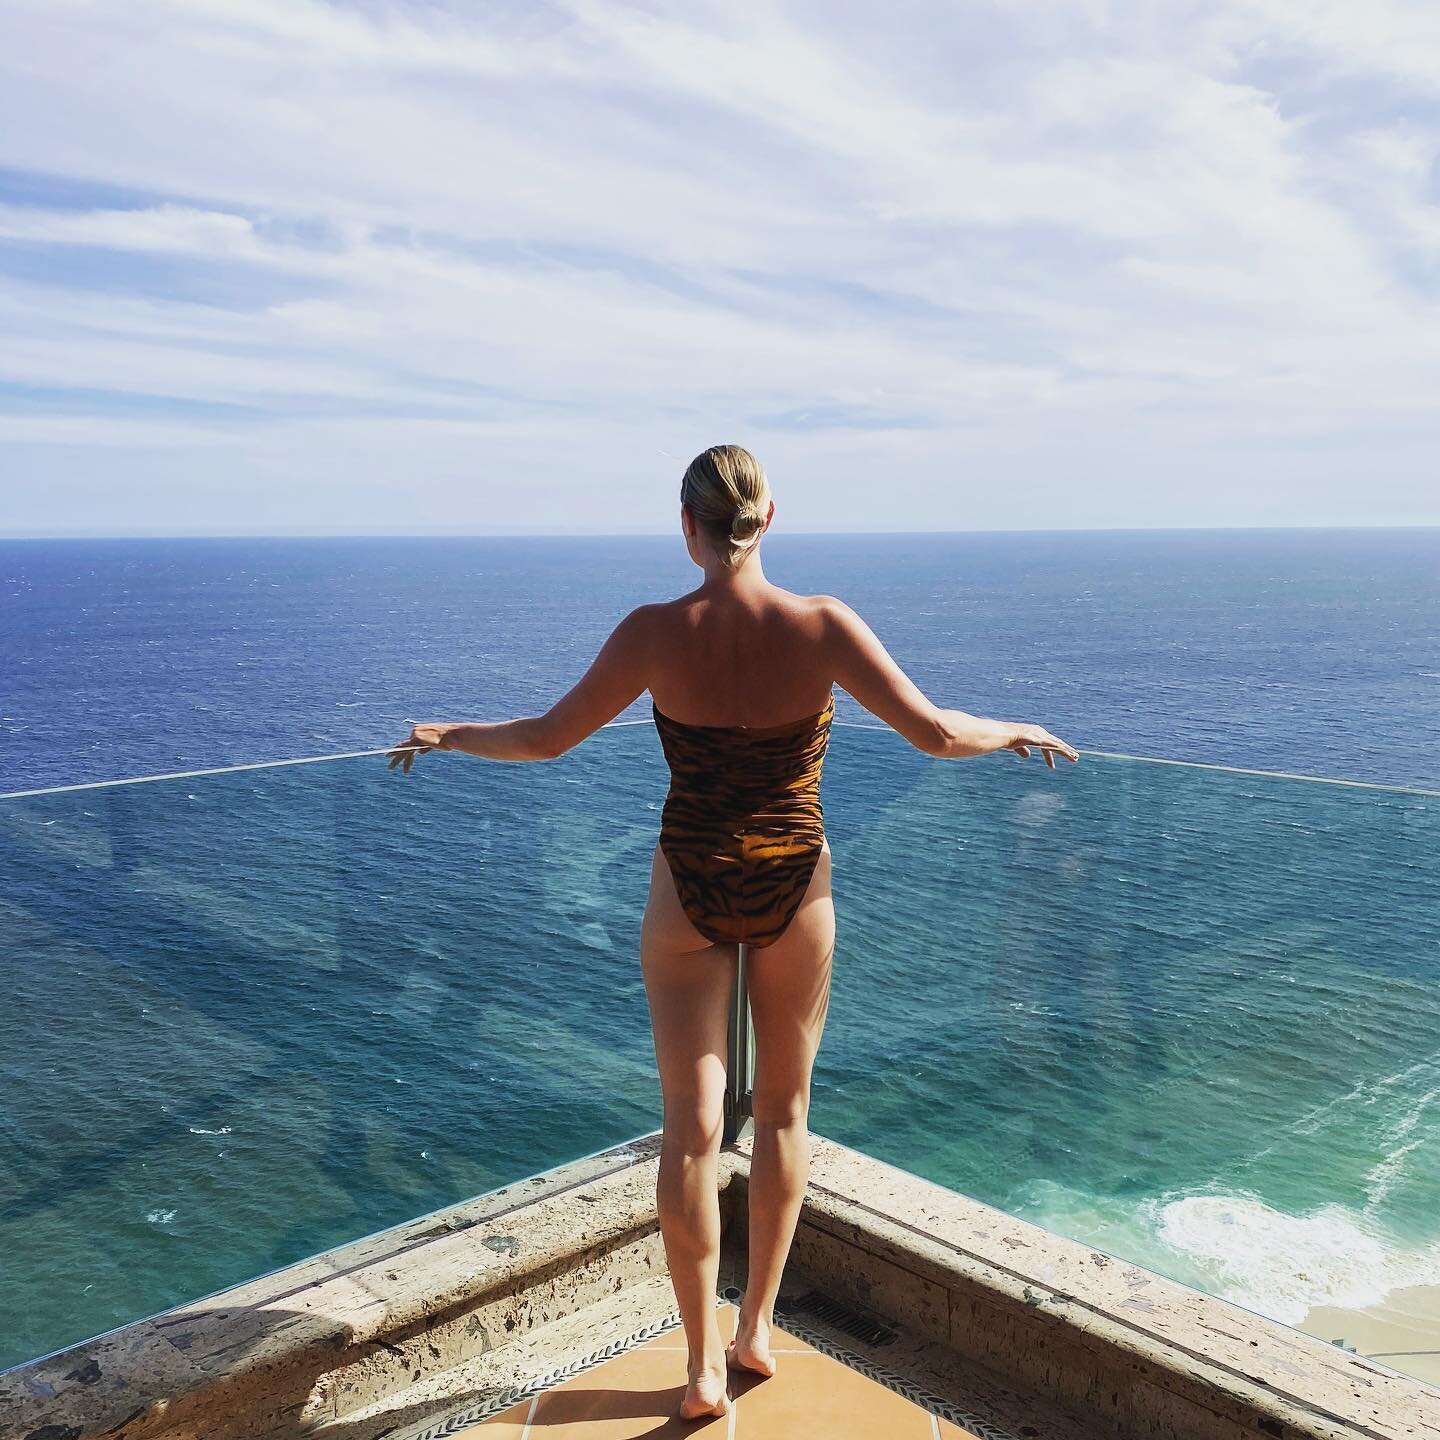 Is this real life?! An absolute dream waking up to this view every morning 🥰
&bull;
&bull;
&bull;
#takemeback #cabo #villaturquesa #holiday @cabovillas